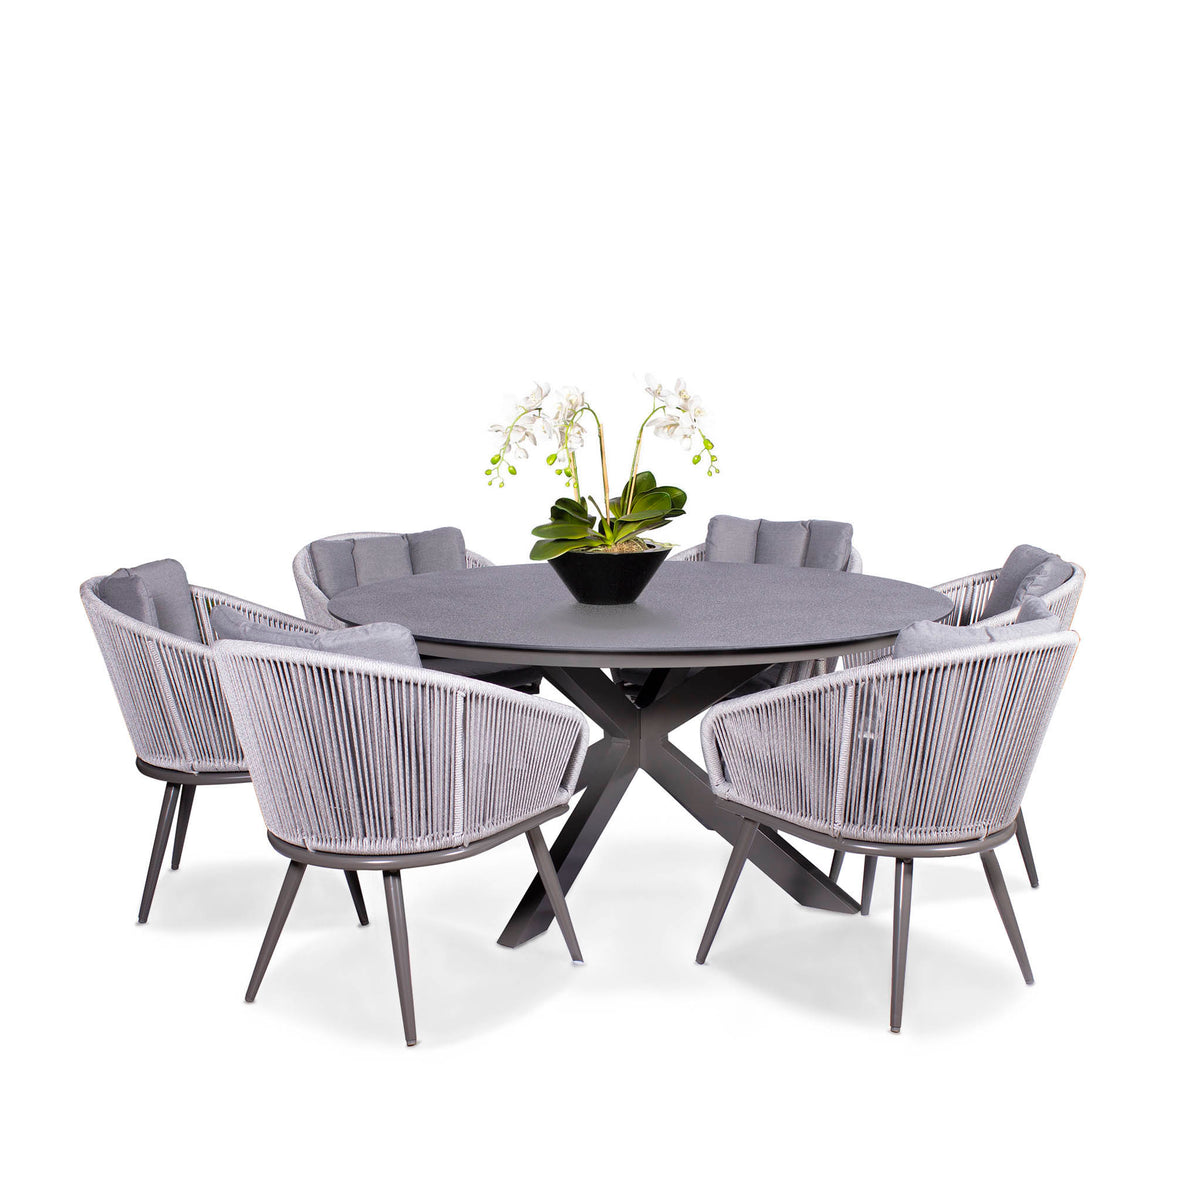 Aspen 6 Seat Stone Look Garden Dining Set from Roseland Furniture with 6 chairs